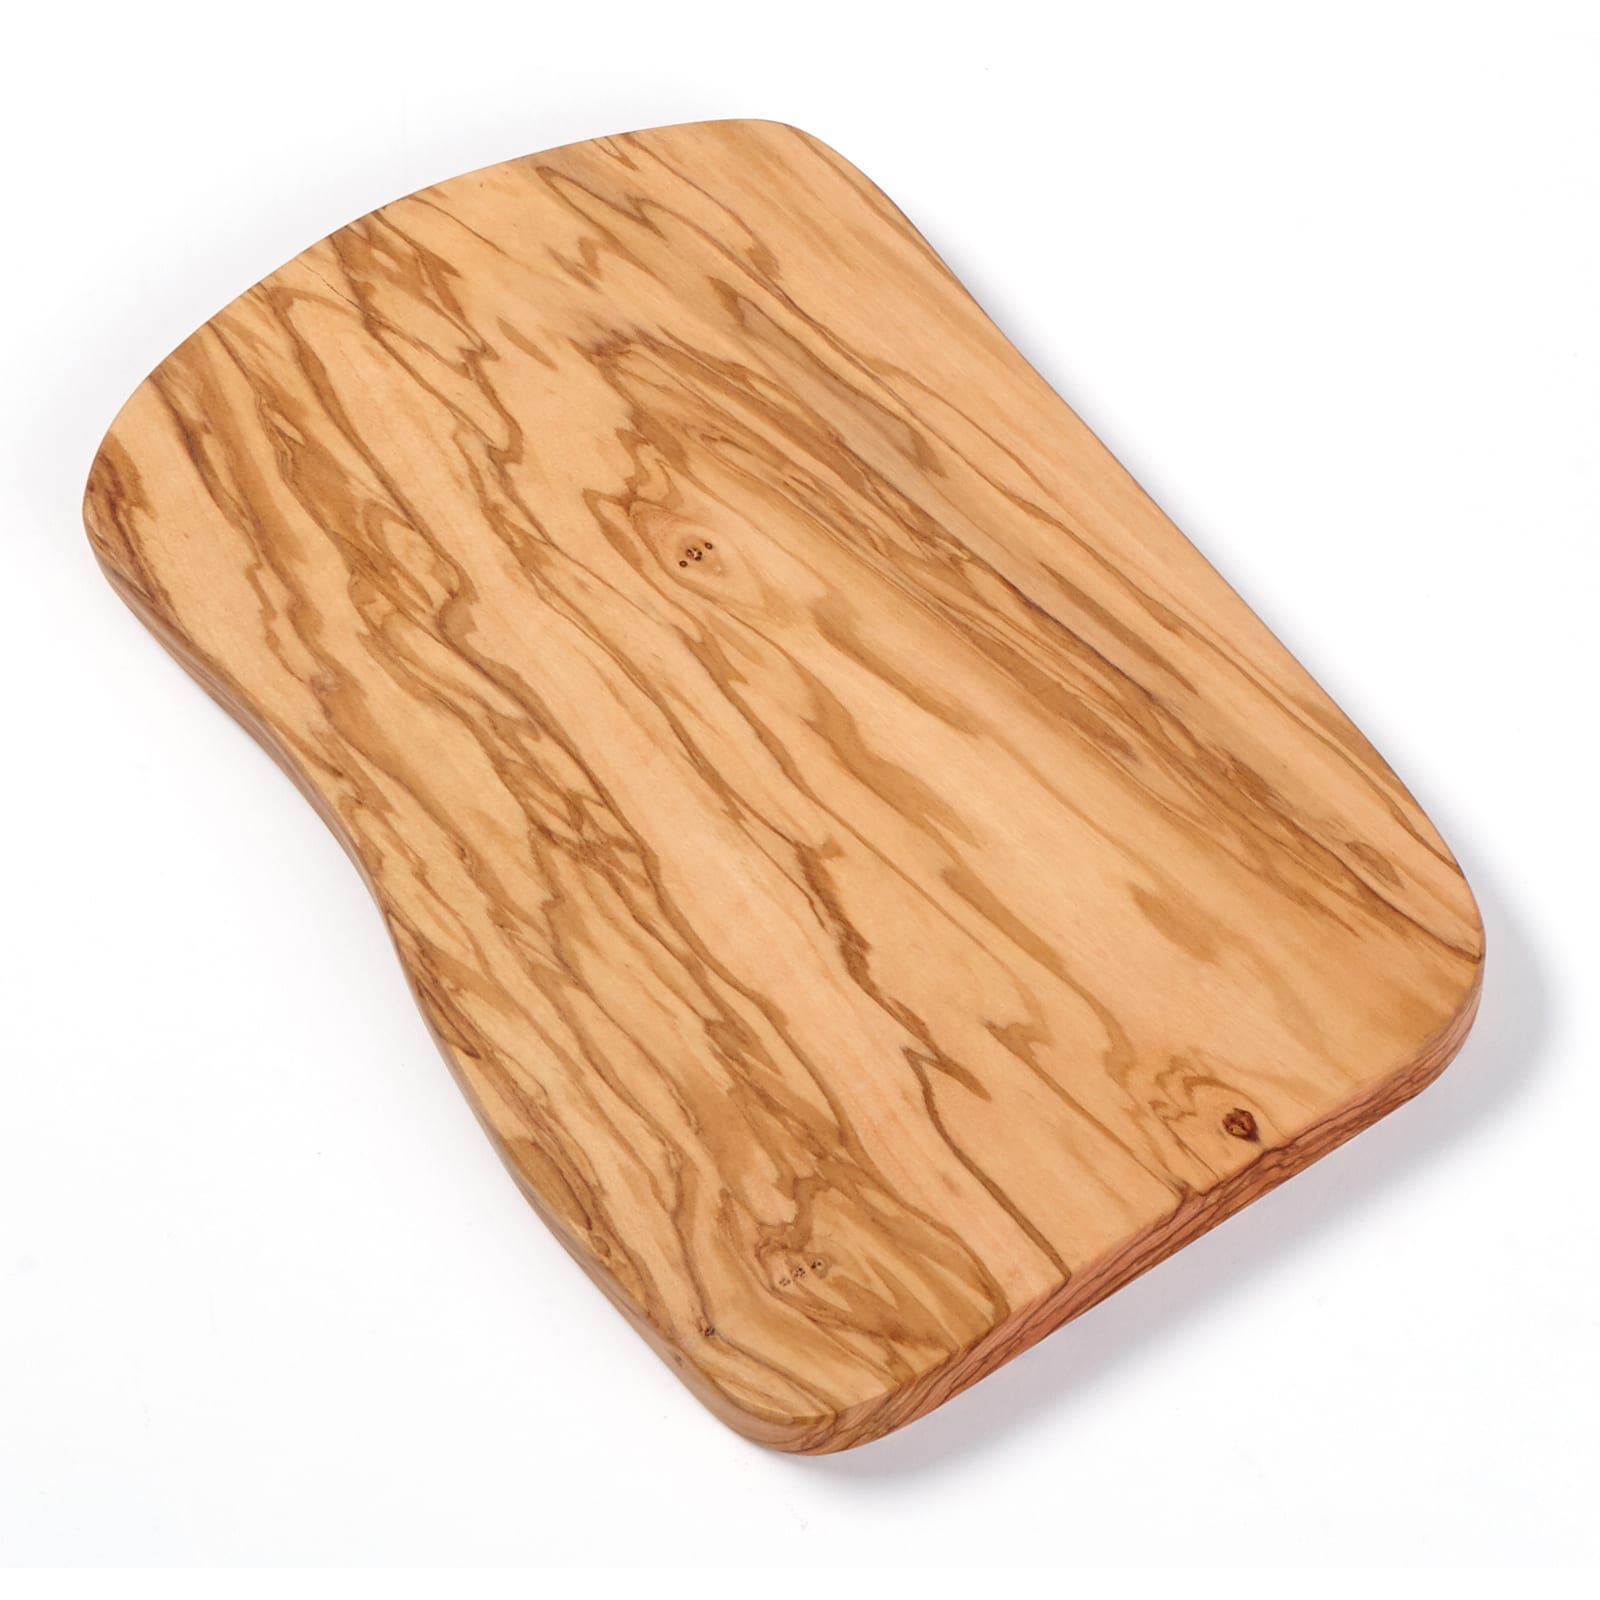 American Metalcraft Olive Wood 12 x 9 Inch Serving Board